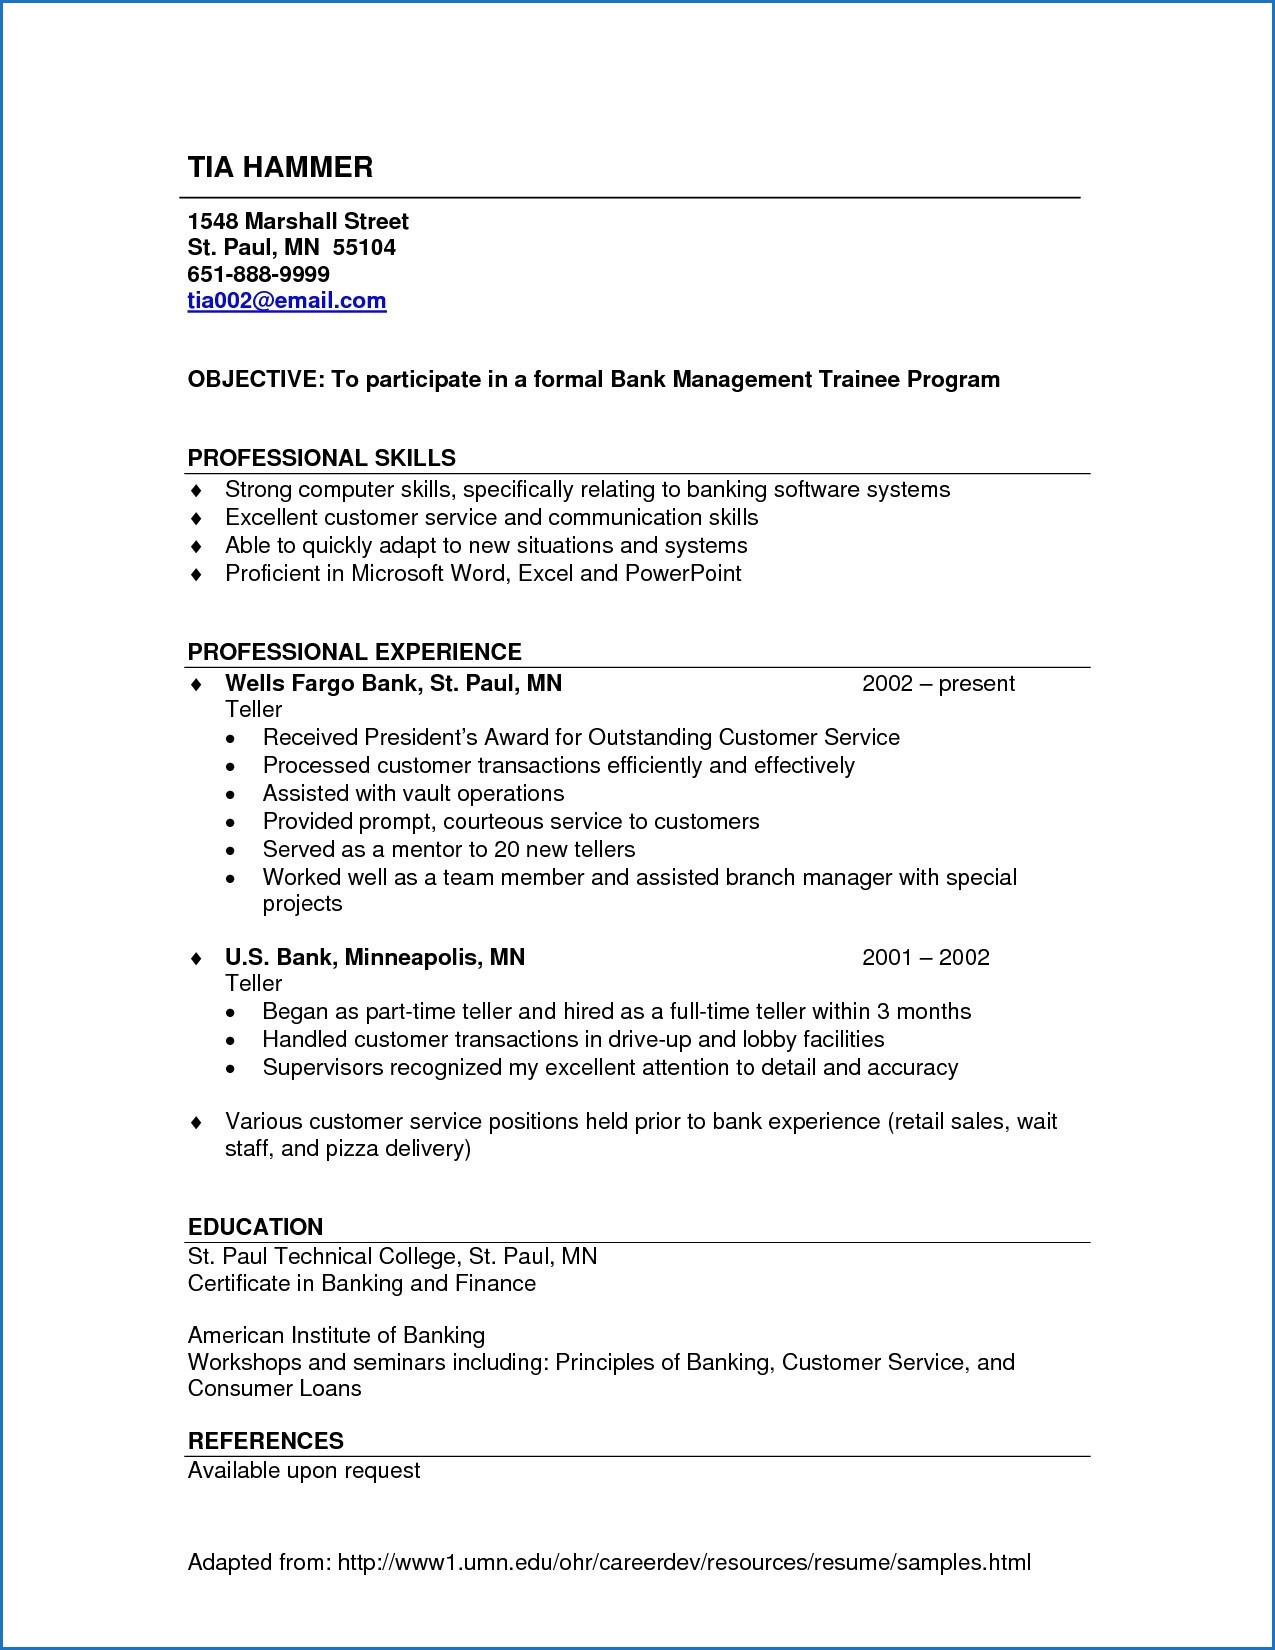 Examples Of Objectives For Resumes Objectives On Resume Awesome Resumes Examples Objectives Free Resume Objective Examples For Fice Of Objectives On Resume examples of objectives for resumes|wikiresume.com